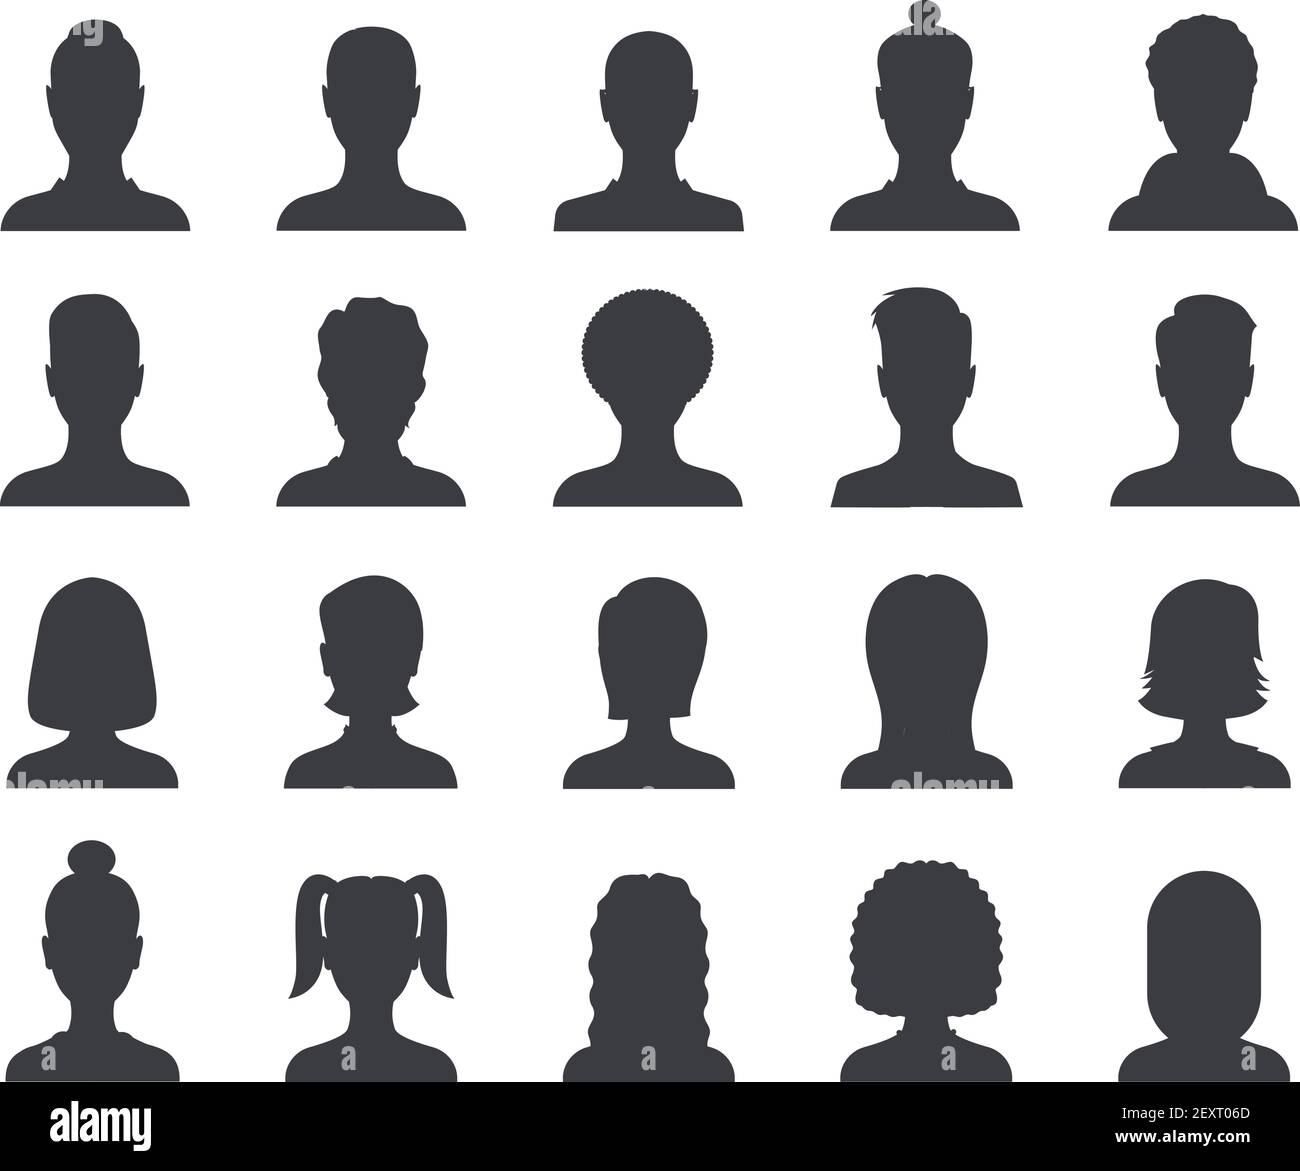 People Silhouette Avatar  Business Man Icon Transparent PNG  1280x1280   Free Download on NicePNG